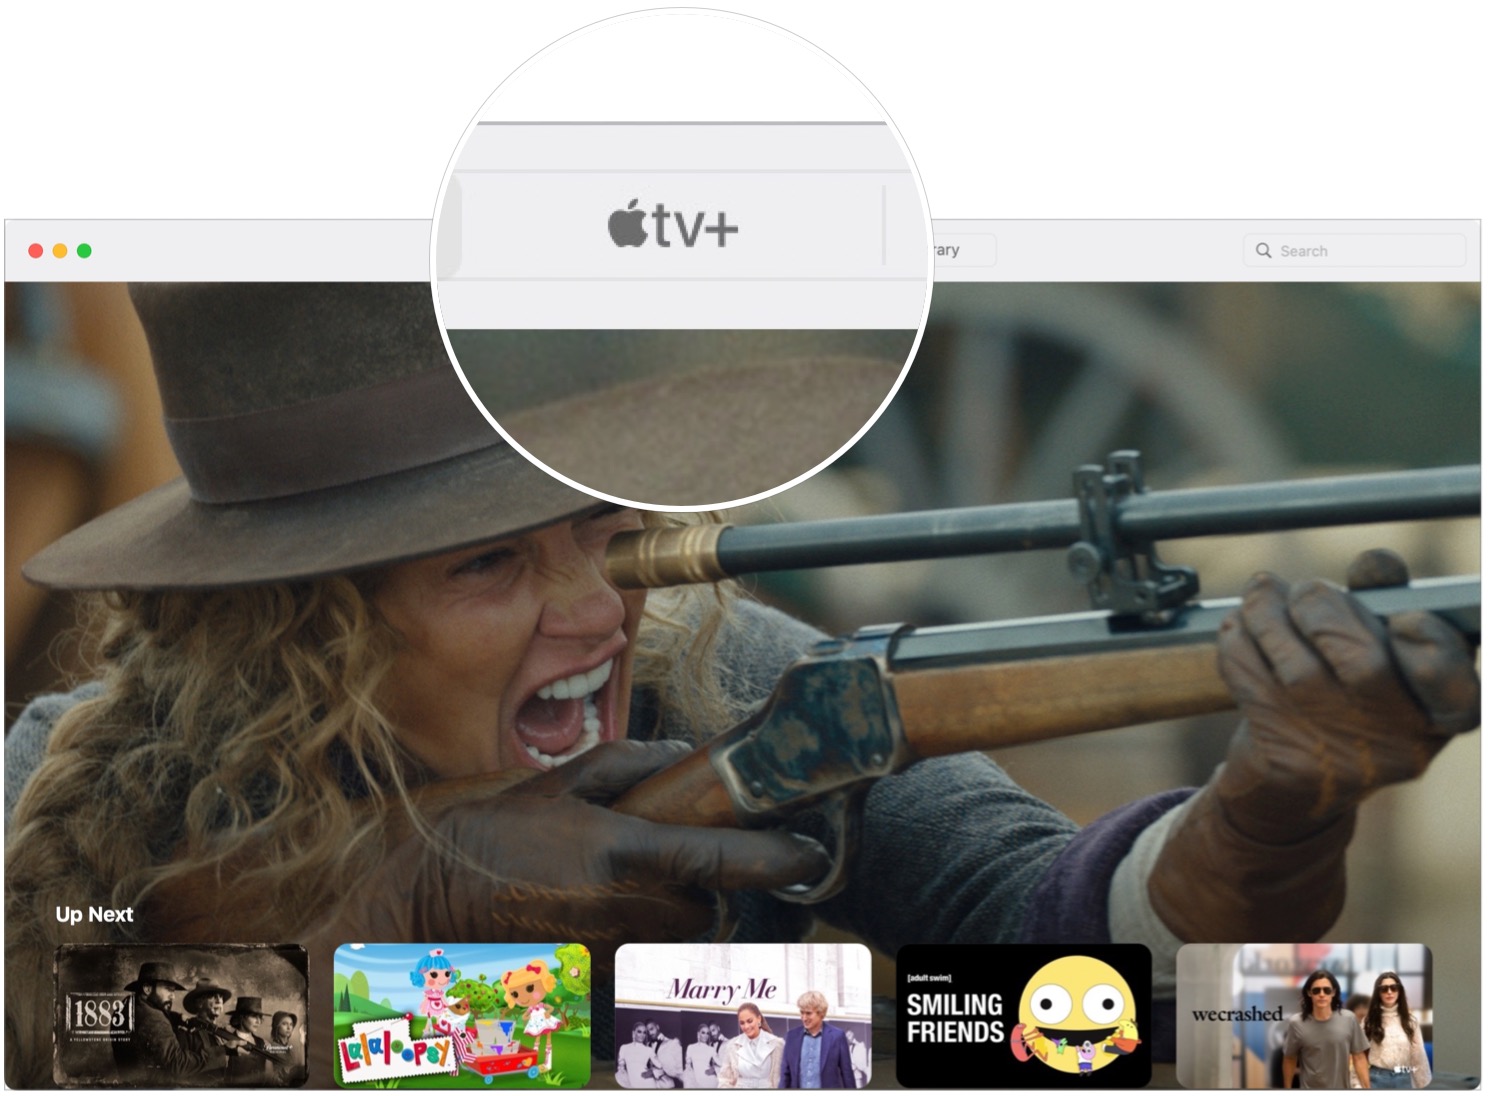 To activate your subscription, turn on the eligible device, then sign in with your Apple ID. Open the TV app. The offer should be presented after launching the app. If not, go to the Apple TV+ tab, where you'll see the offer. Choose Enjoy 3 Months Free and follow additional directions. 